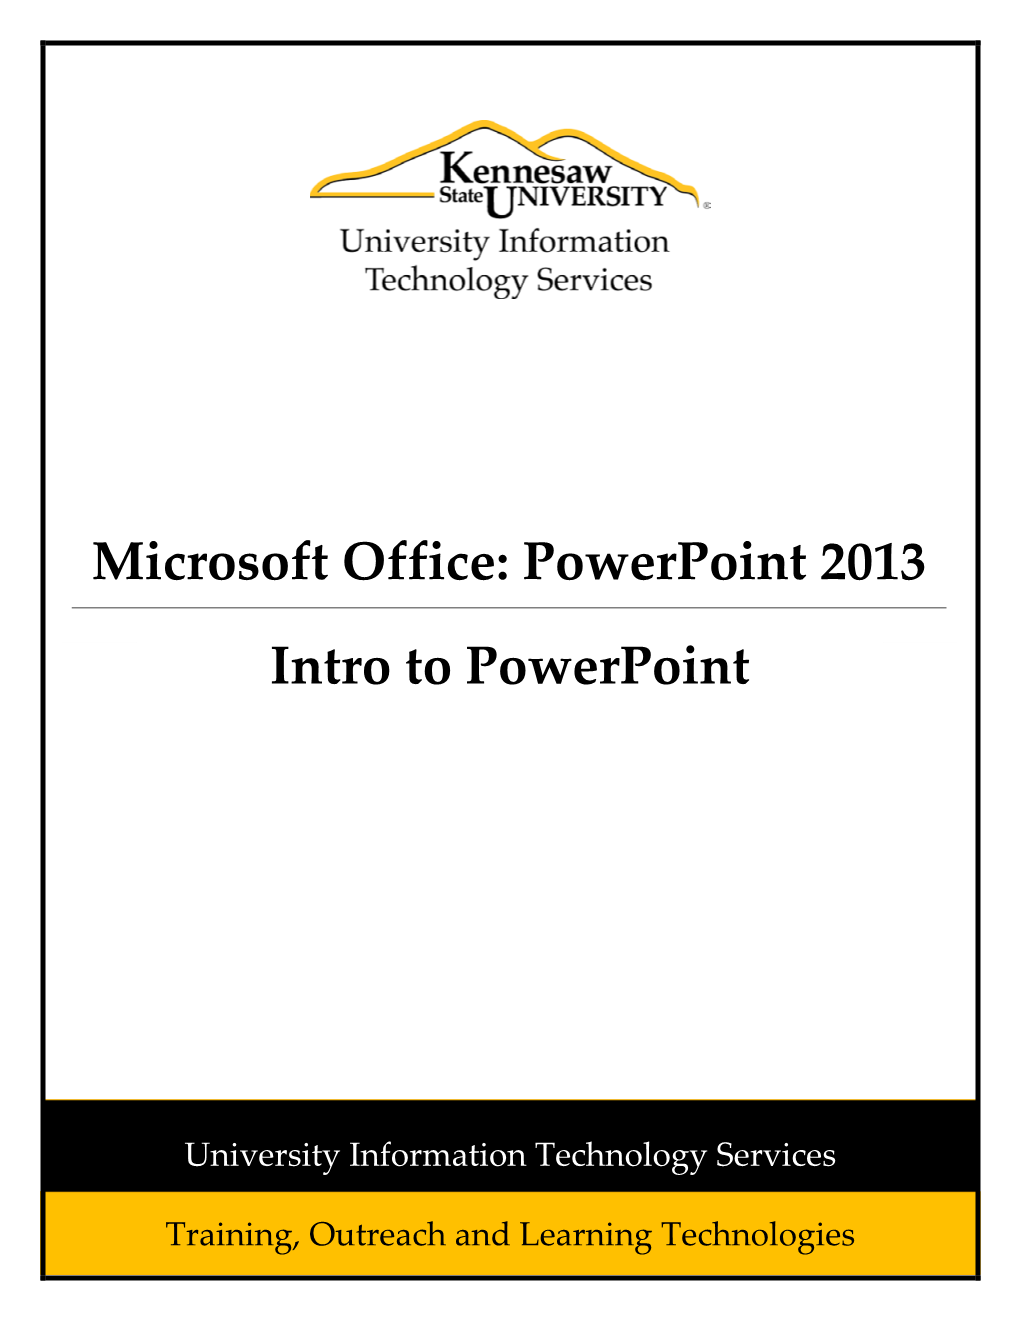 Microsoft Office: Powerpoint 2013 Intro to Powerpoint